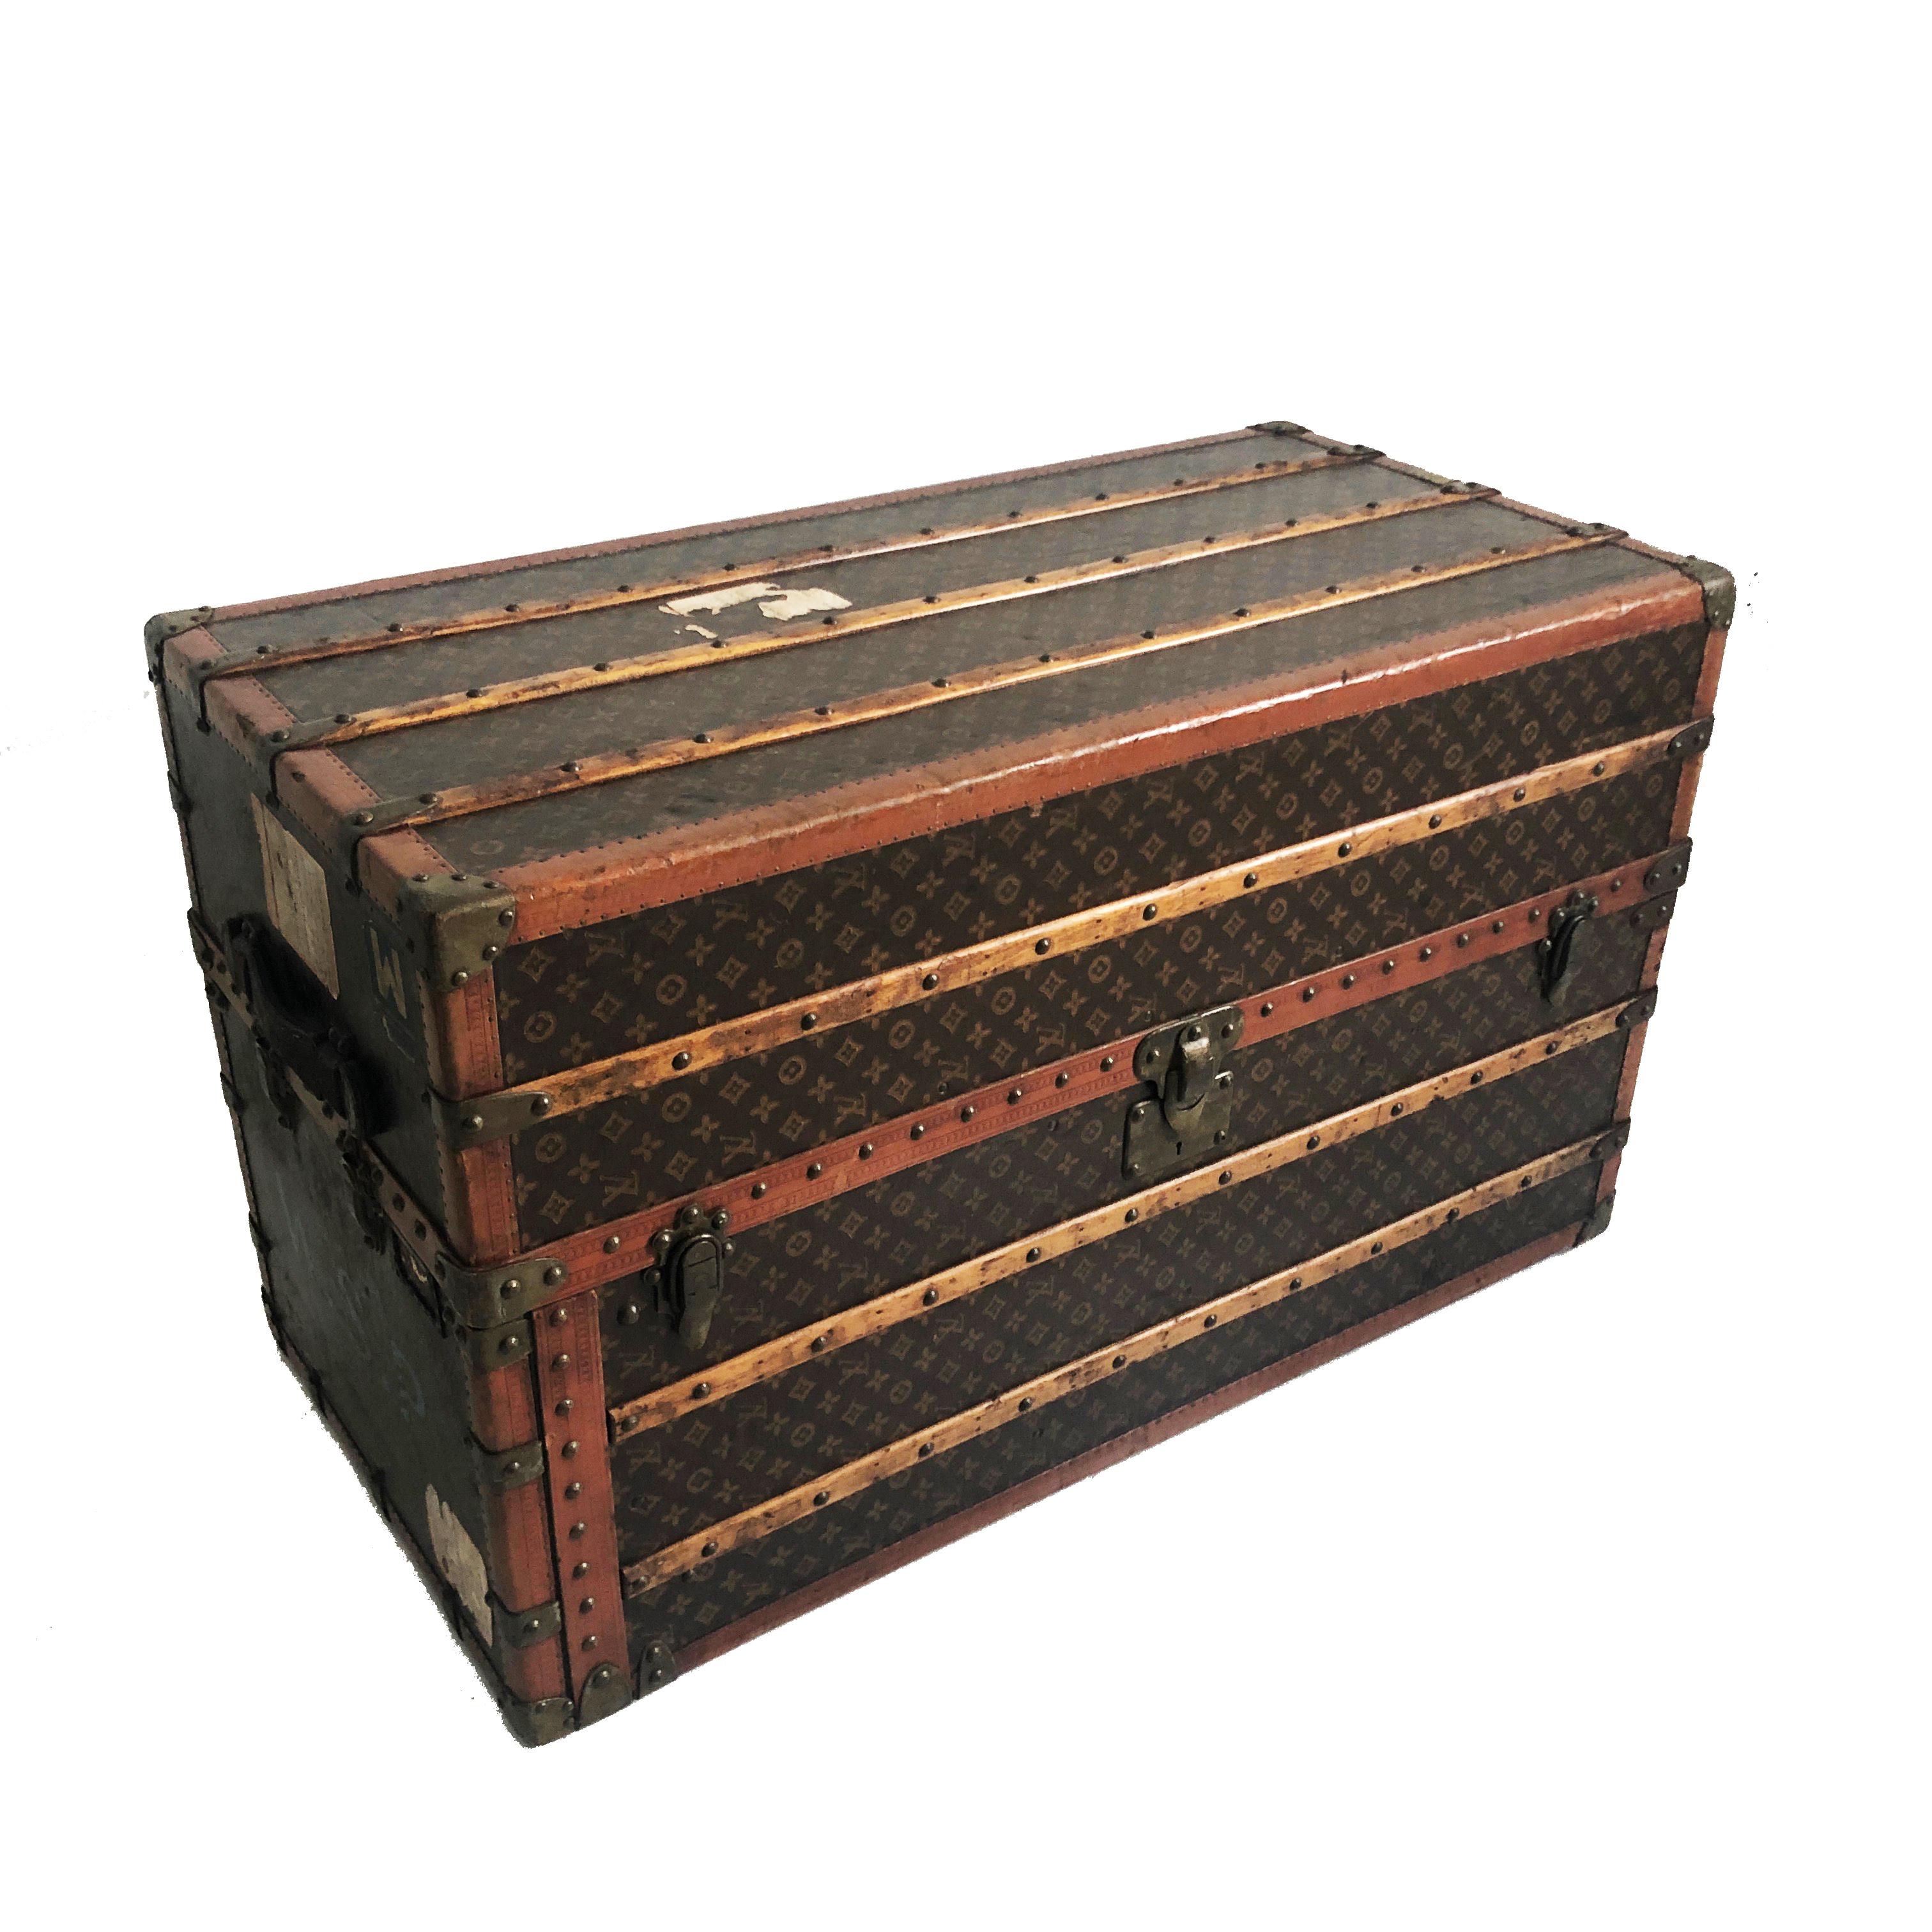 An impressive Louis Vuitton Large Wardrobe Steamer Trunk Travel Case from the early 20th C.  Made from Vuitton's monogram canvas, the interior features 6 drawers, 8 full hangers, 3 pant hangers, 1 cloth screen and a removable velveteen lined storage